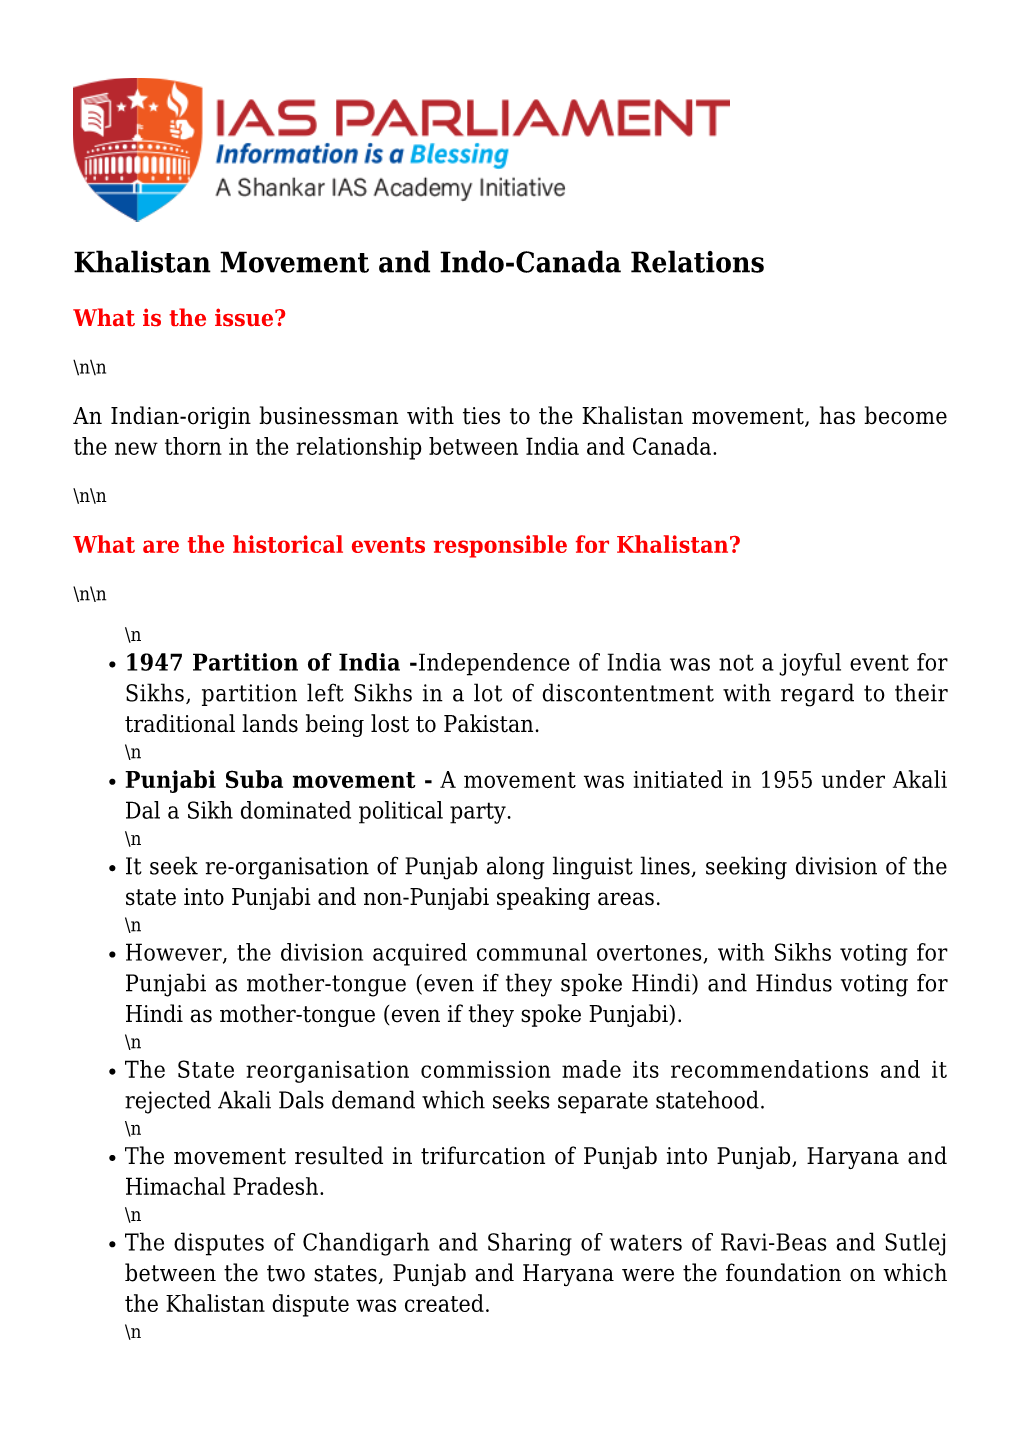 Khalistan Movement and Indo-Canada Relations